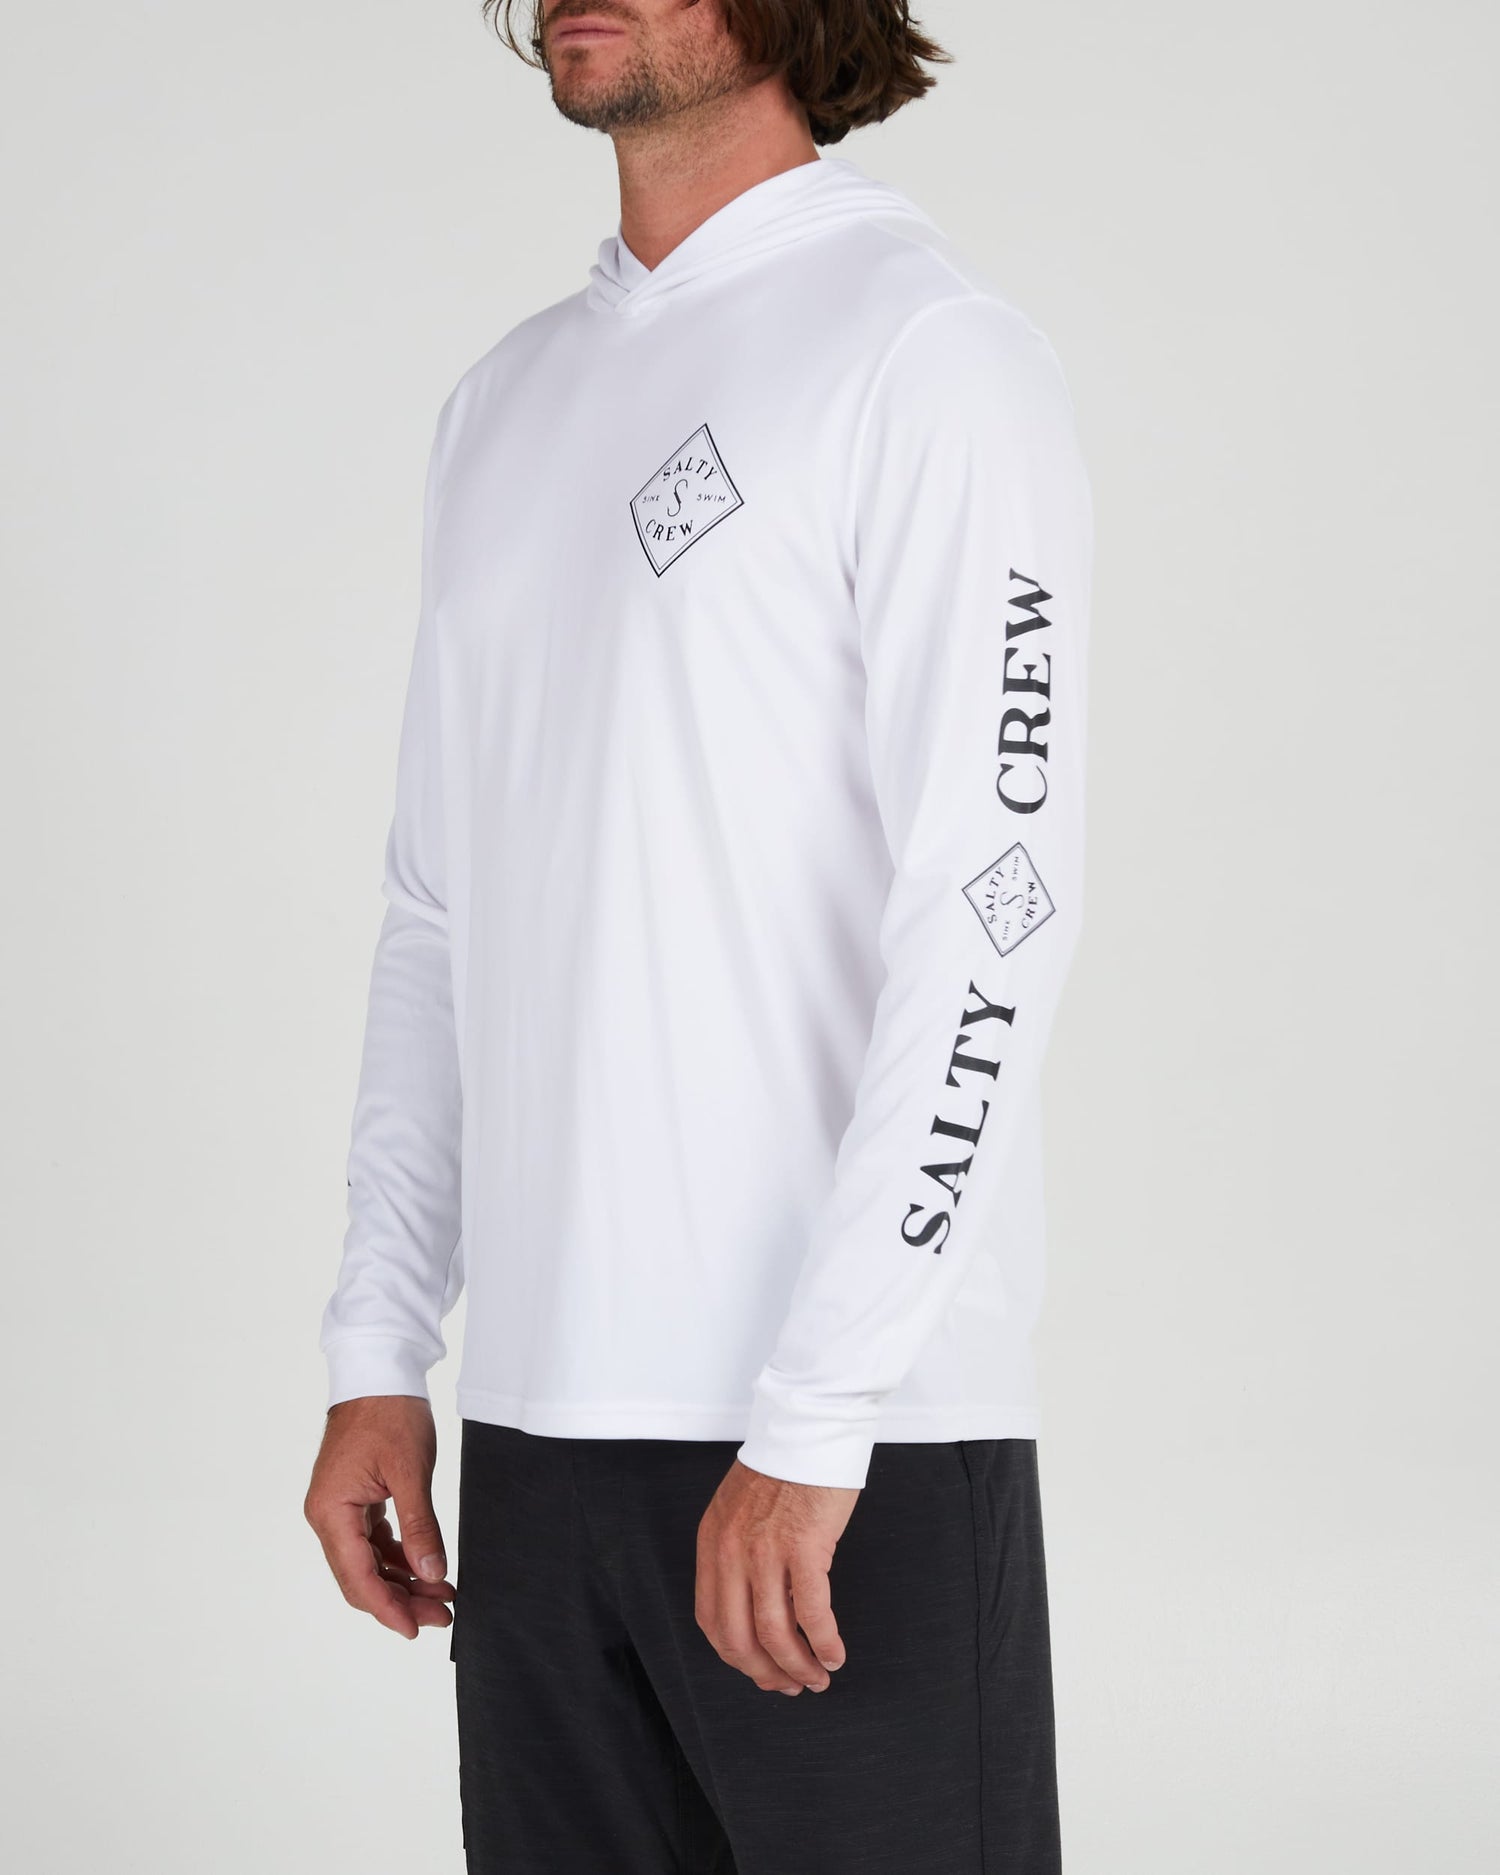 Salty crew SUN PROTECTION Tippet Hood Sunshirt - White in White